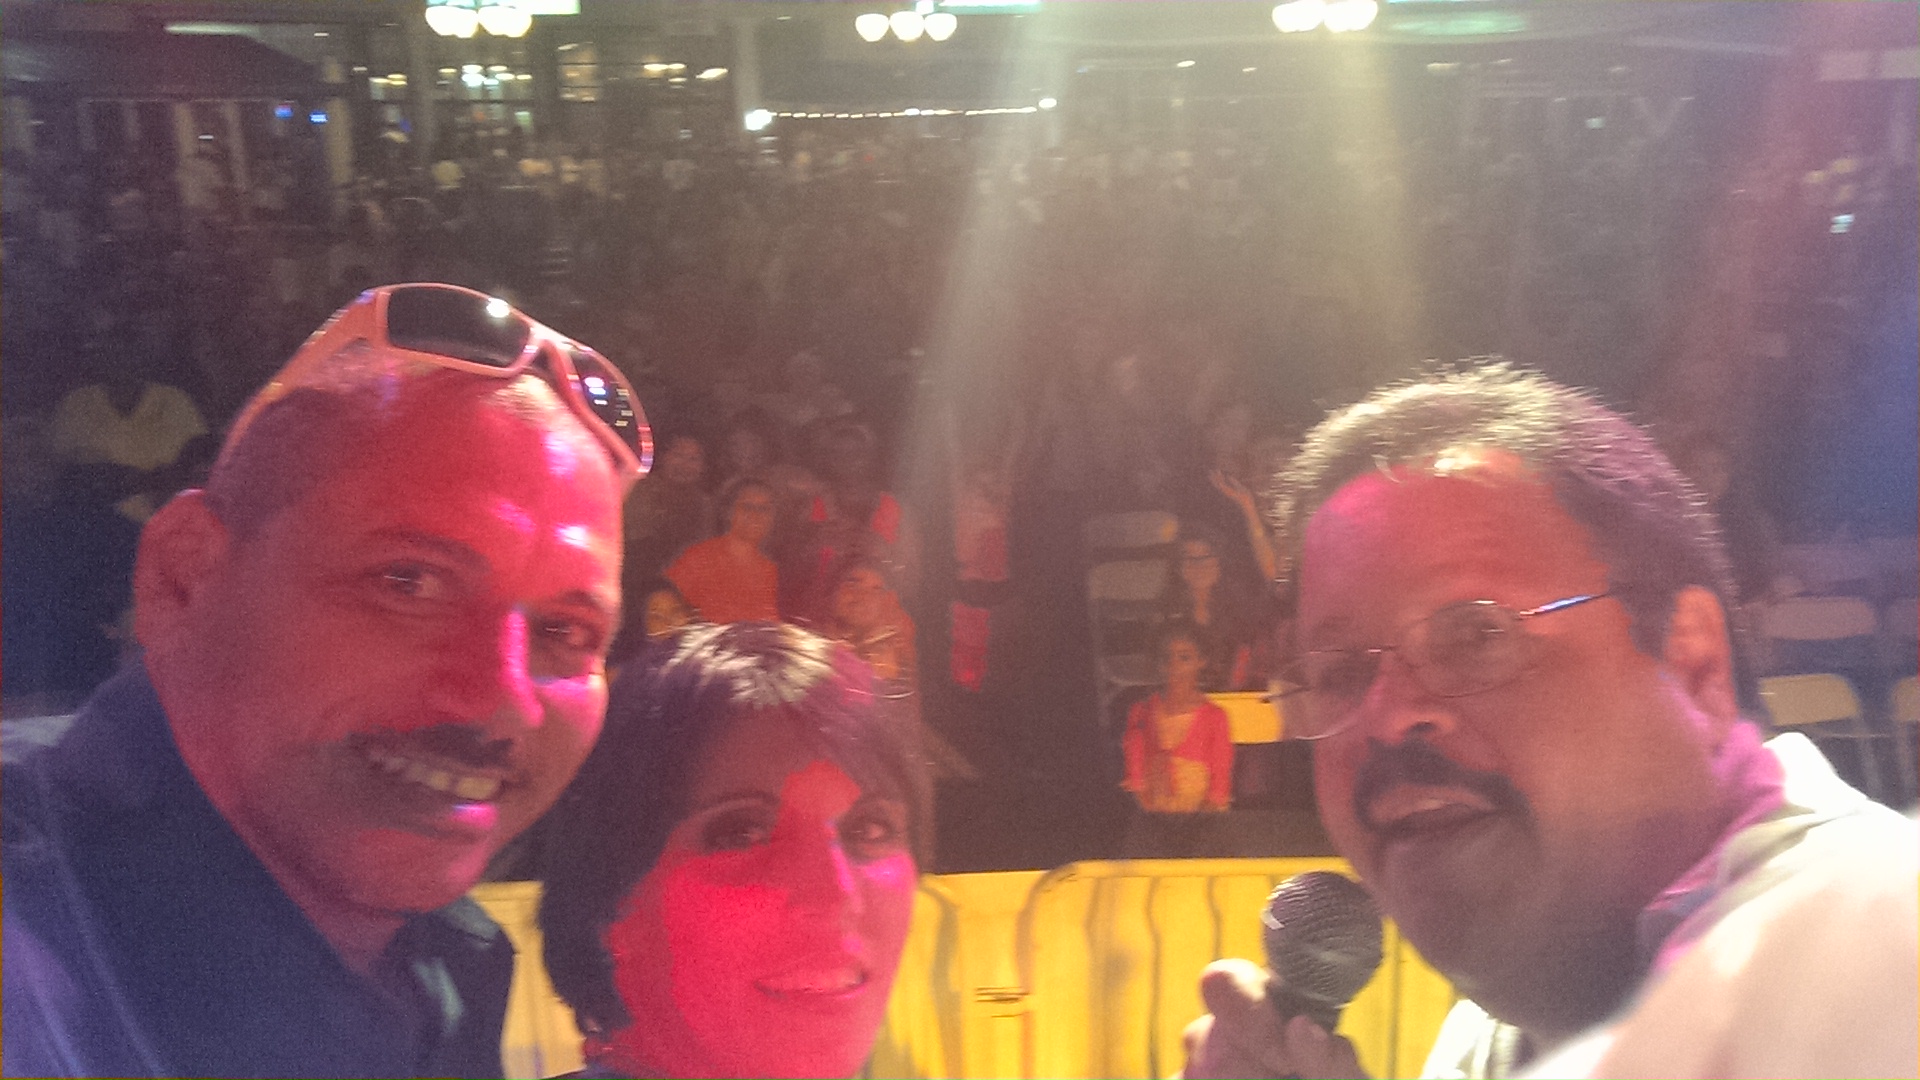 Here I am doing a Selfie on stage. I'm on the right. Gina Francica is in the middle. I don't recall the other gents name.